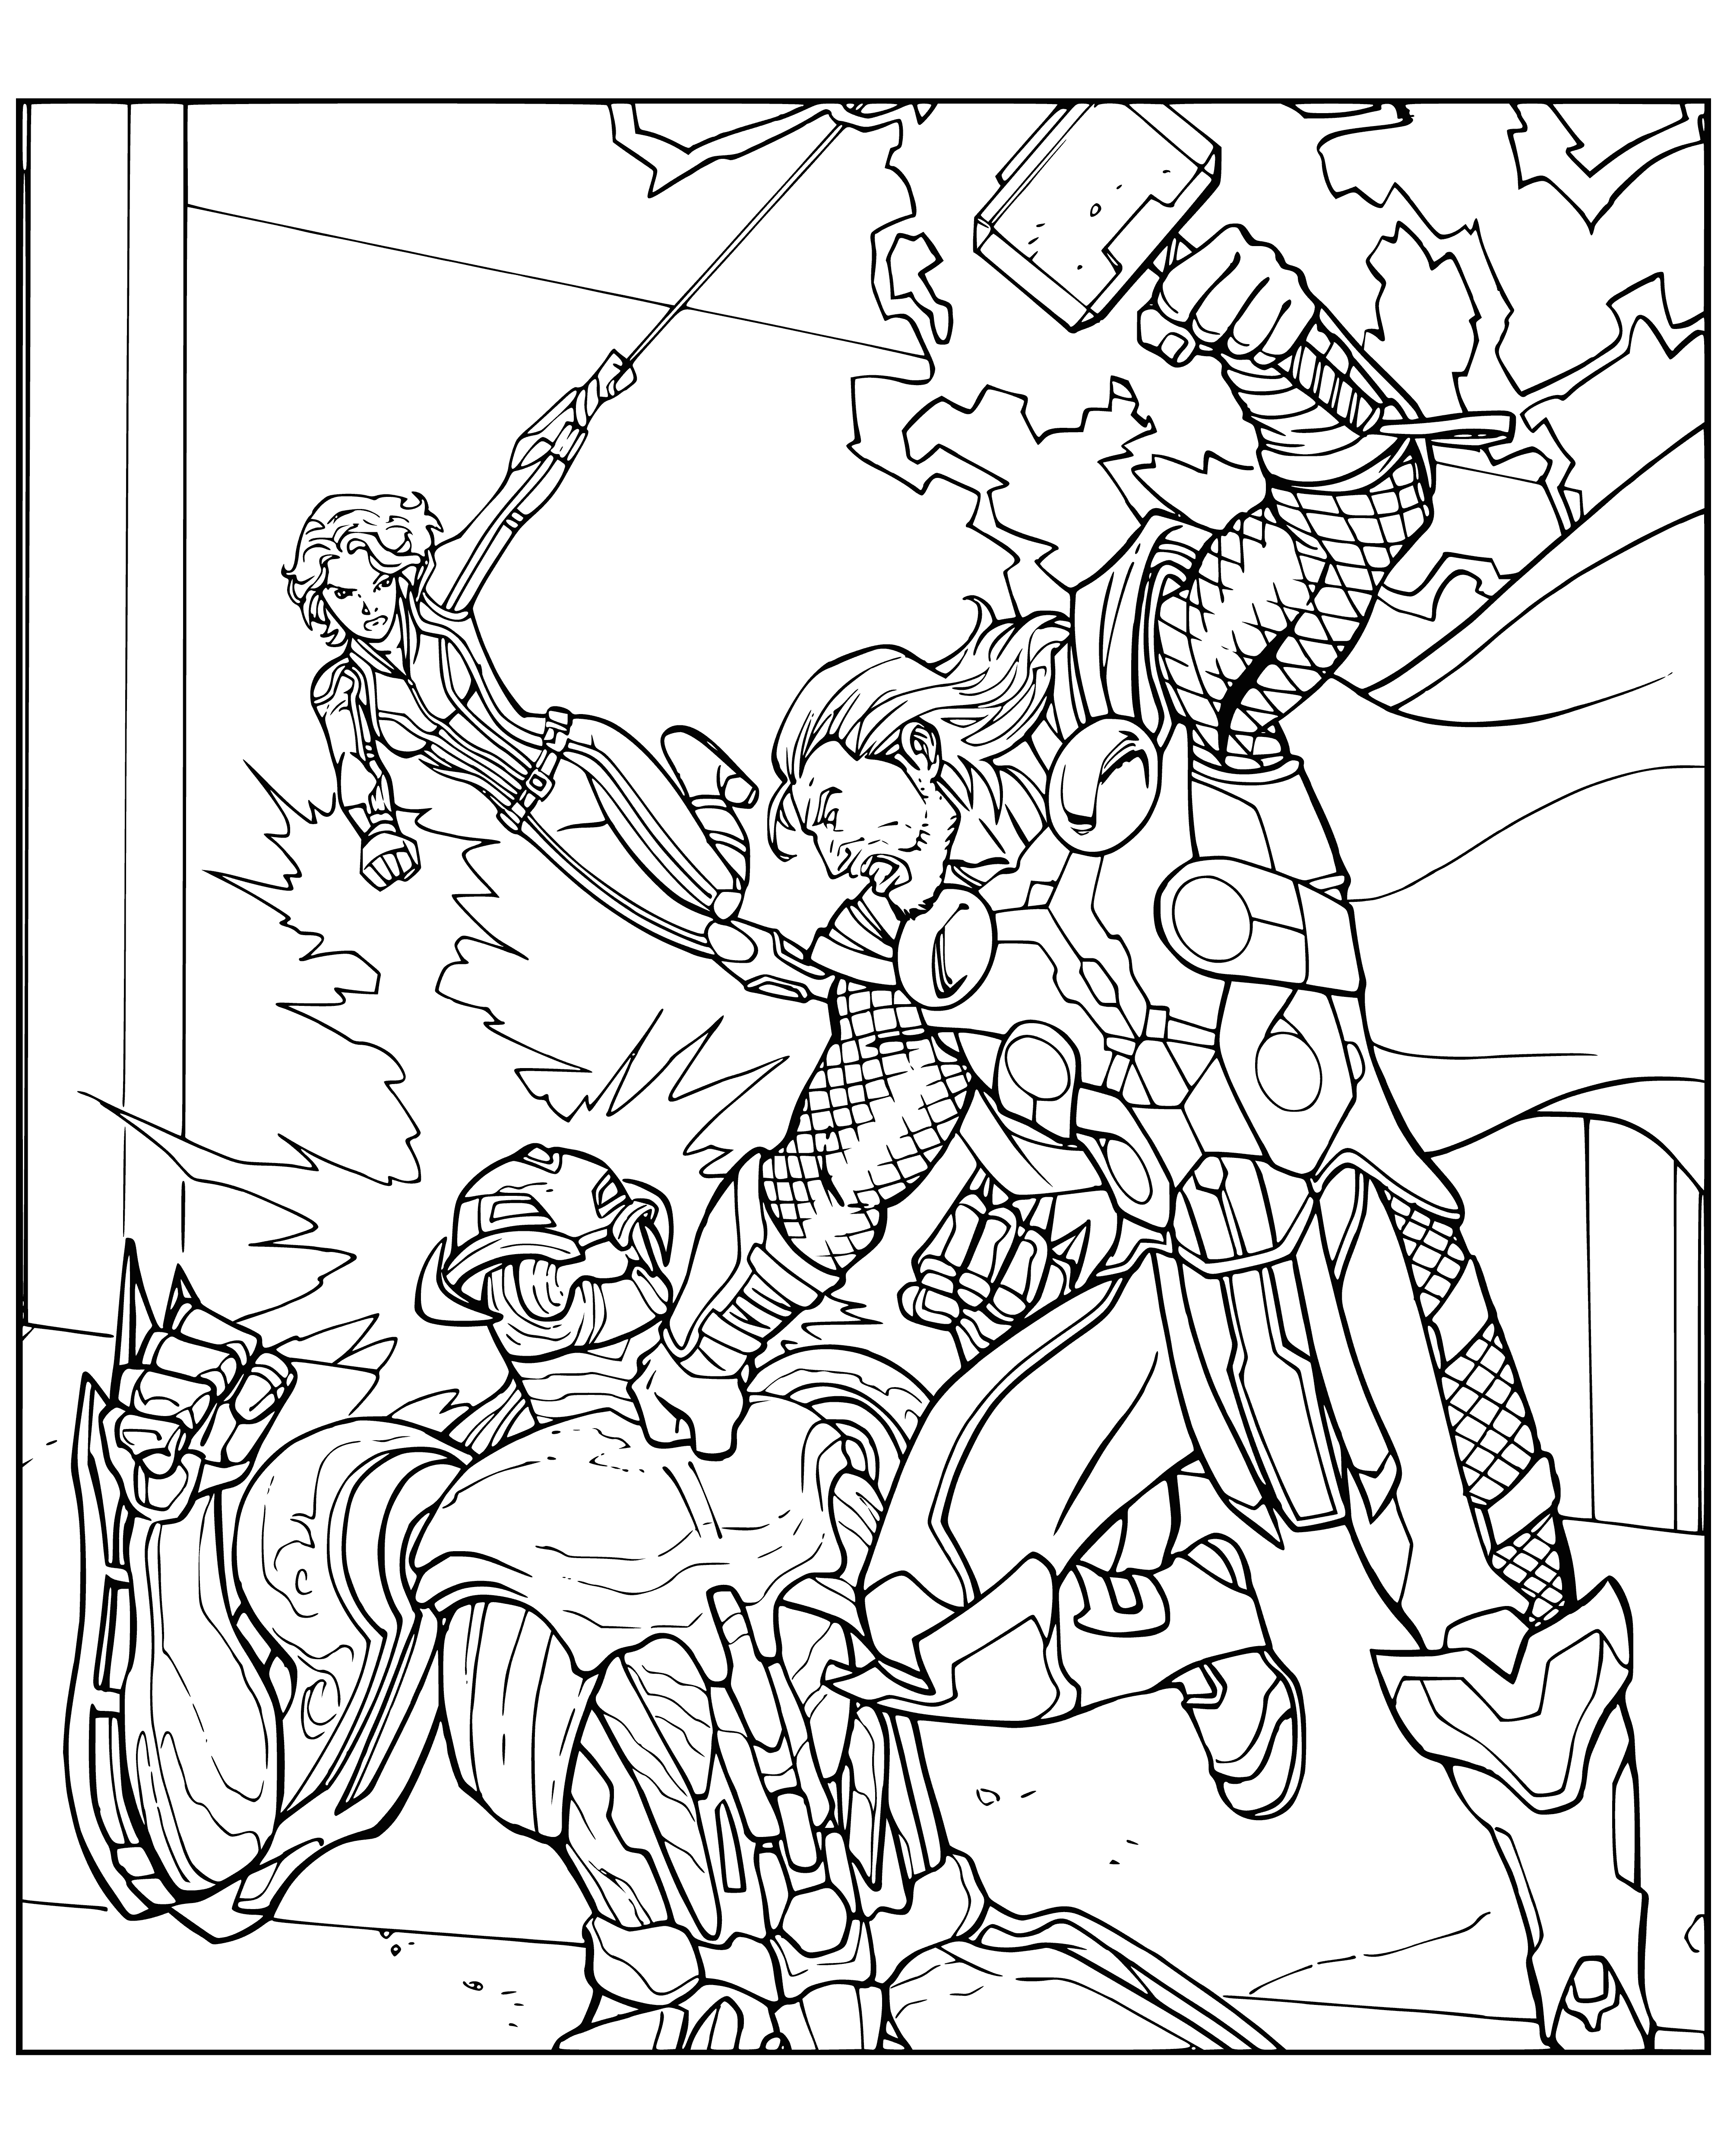 coloring page: Group of superheroes stands in cityscape: muscular man with cape and hammer, stoic woman in black and robot.